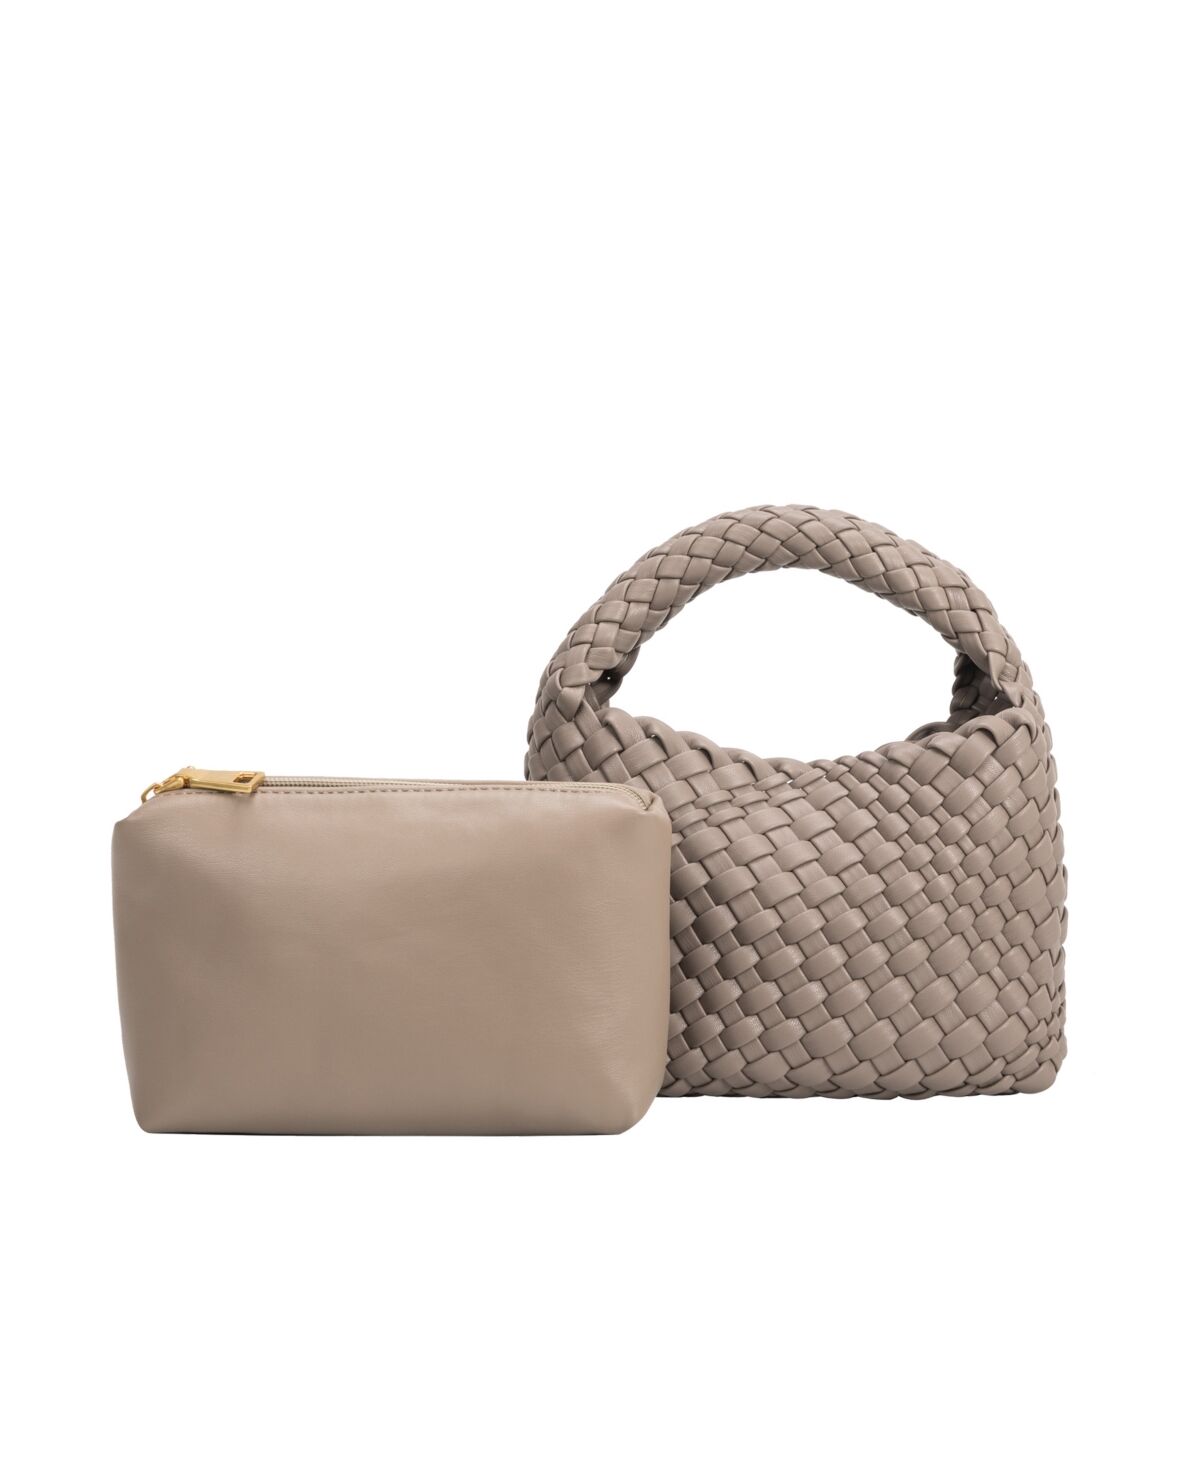 Melie Bianco Women's Sylvie Tote Bag - Taupe